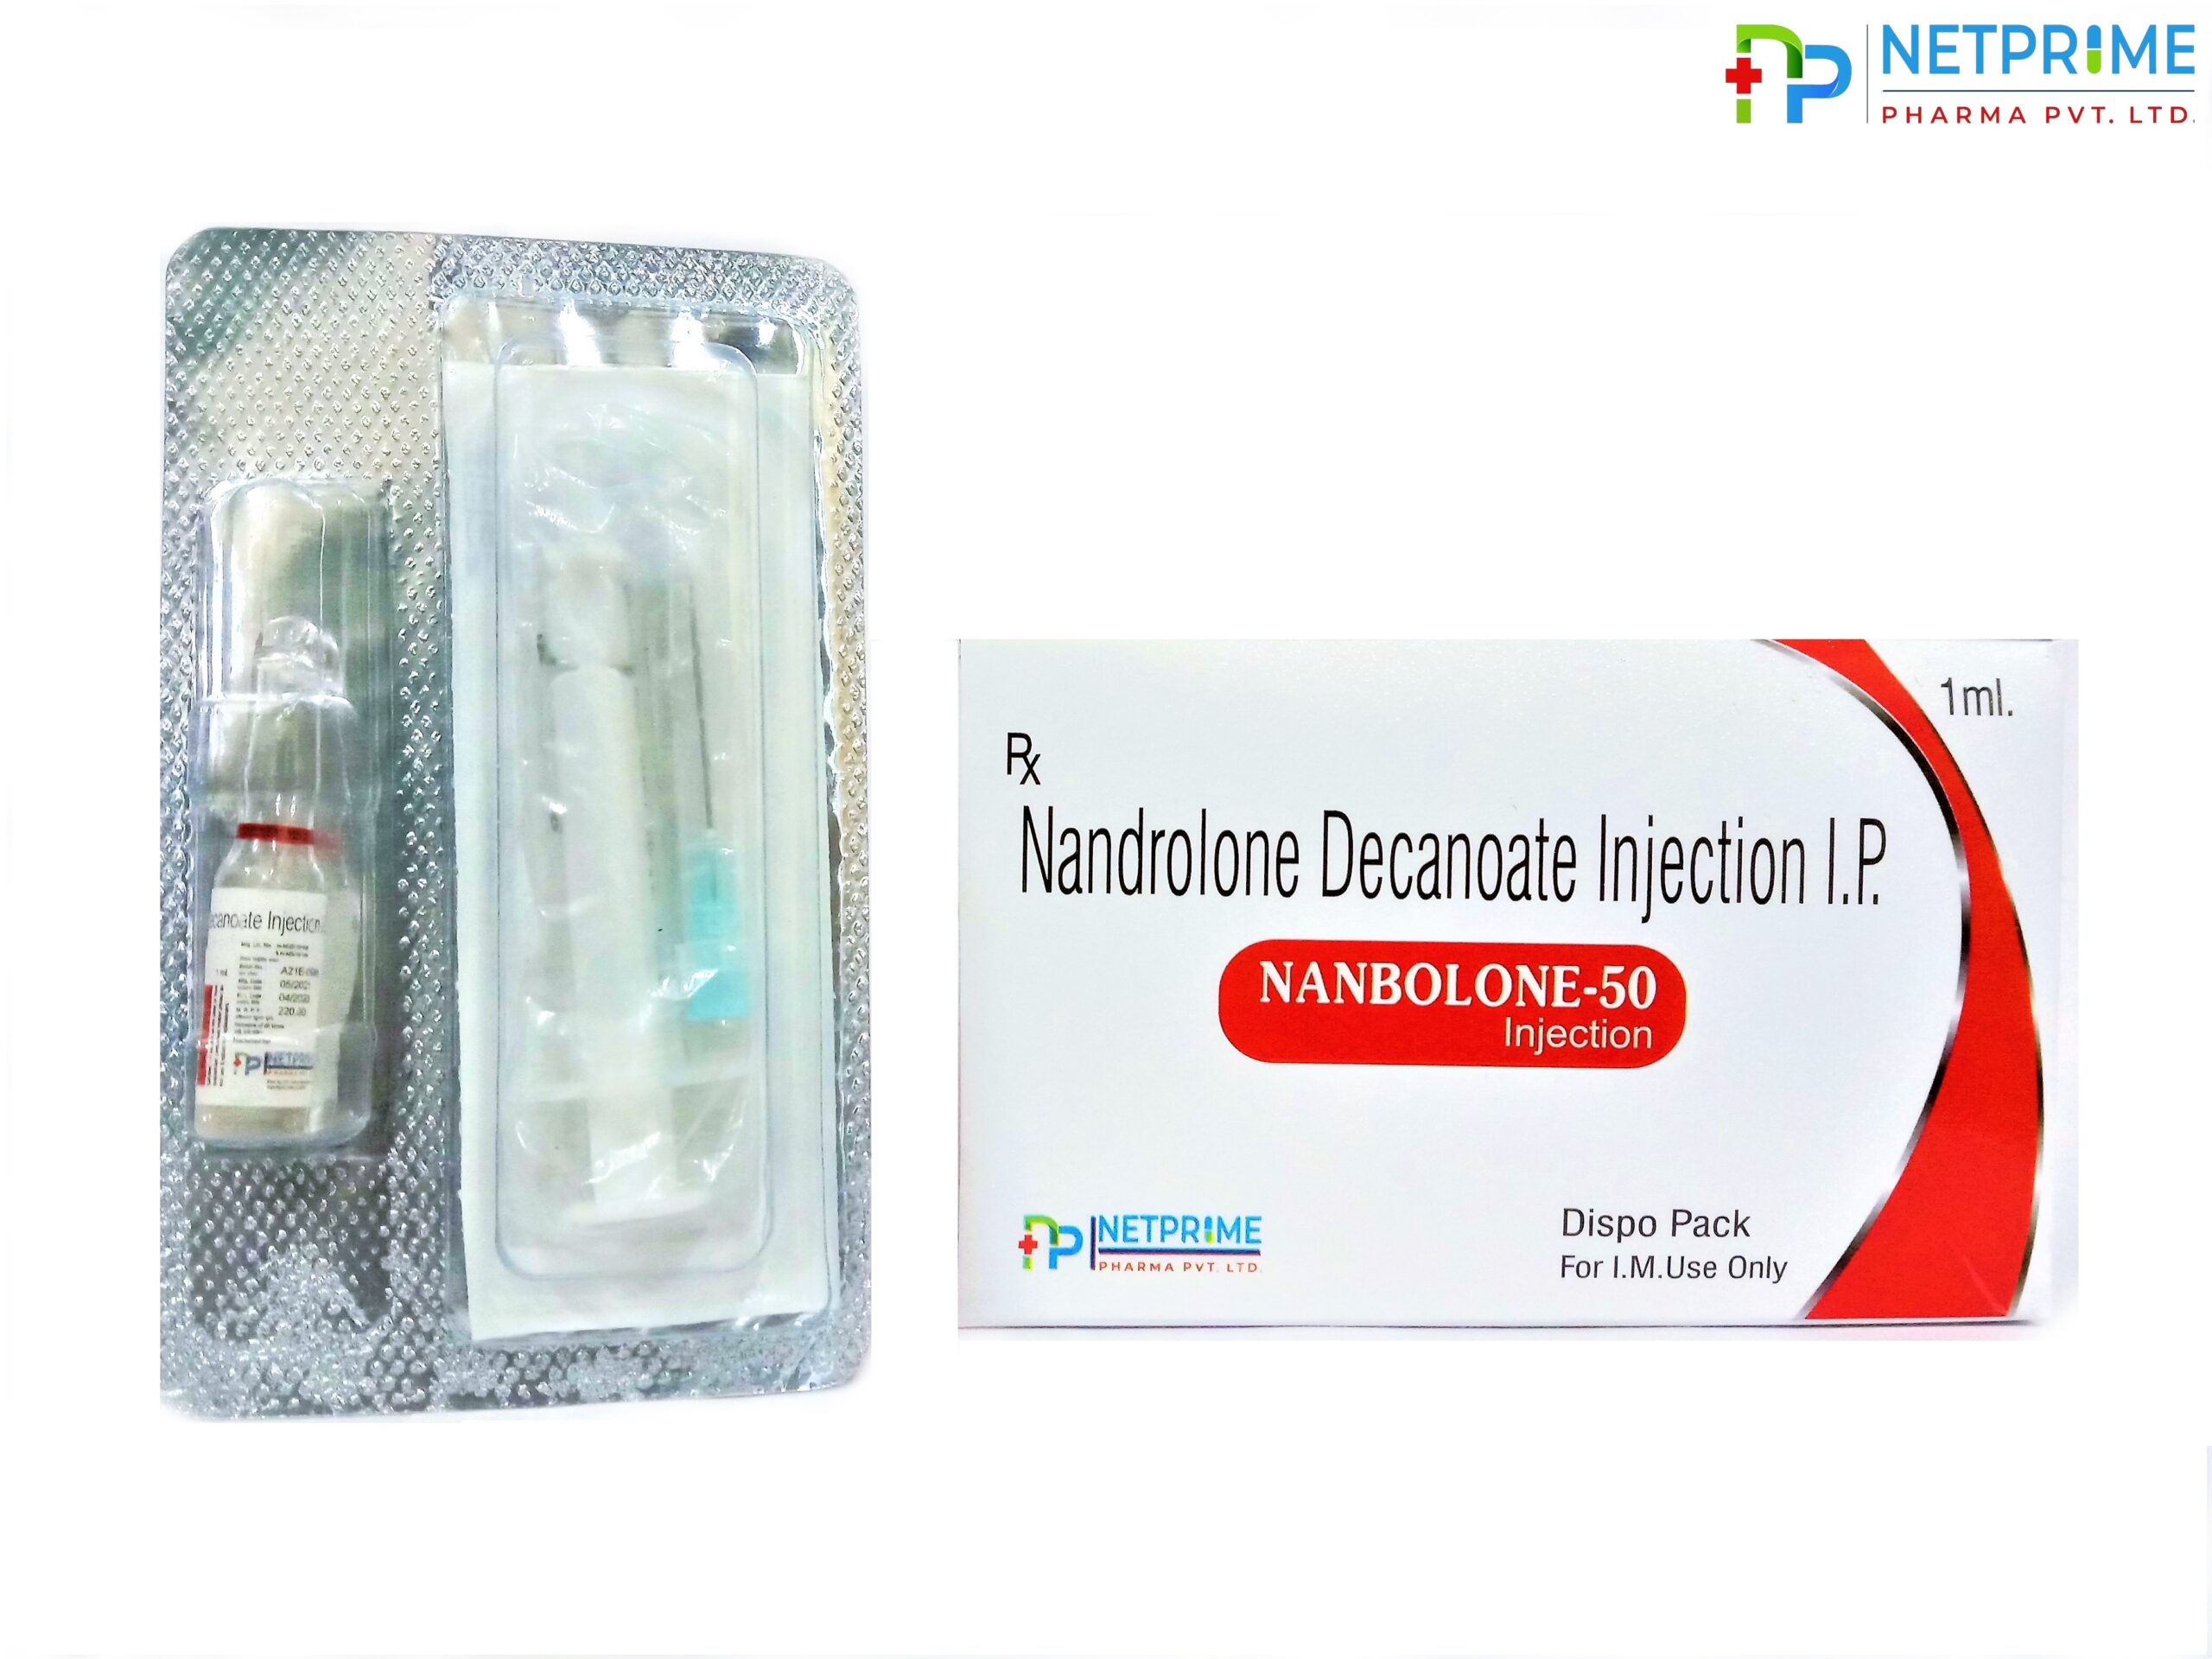 Nandrolone Decanoate 50 mg Injection